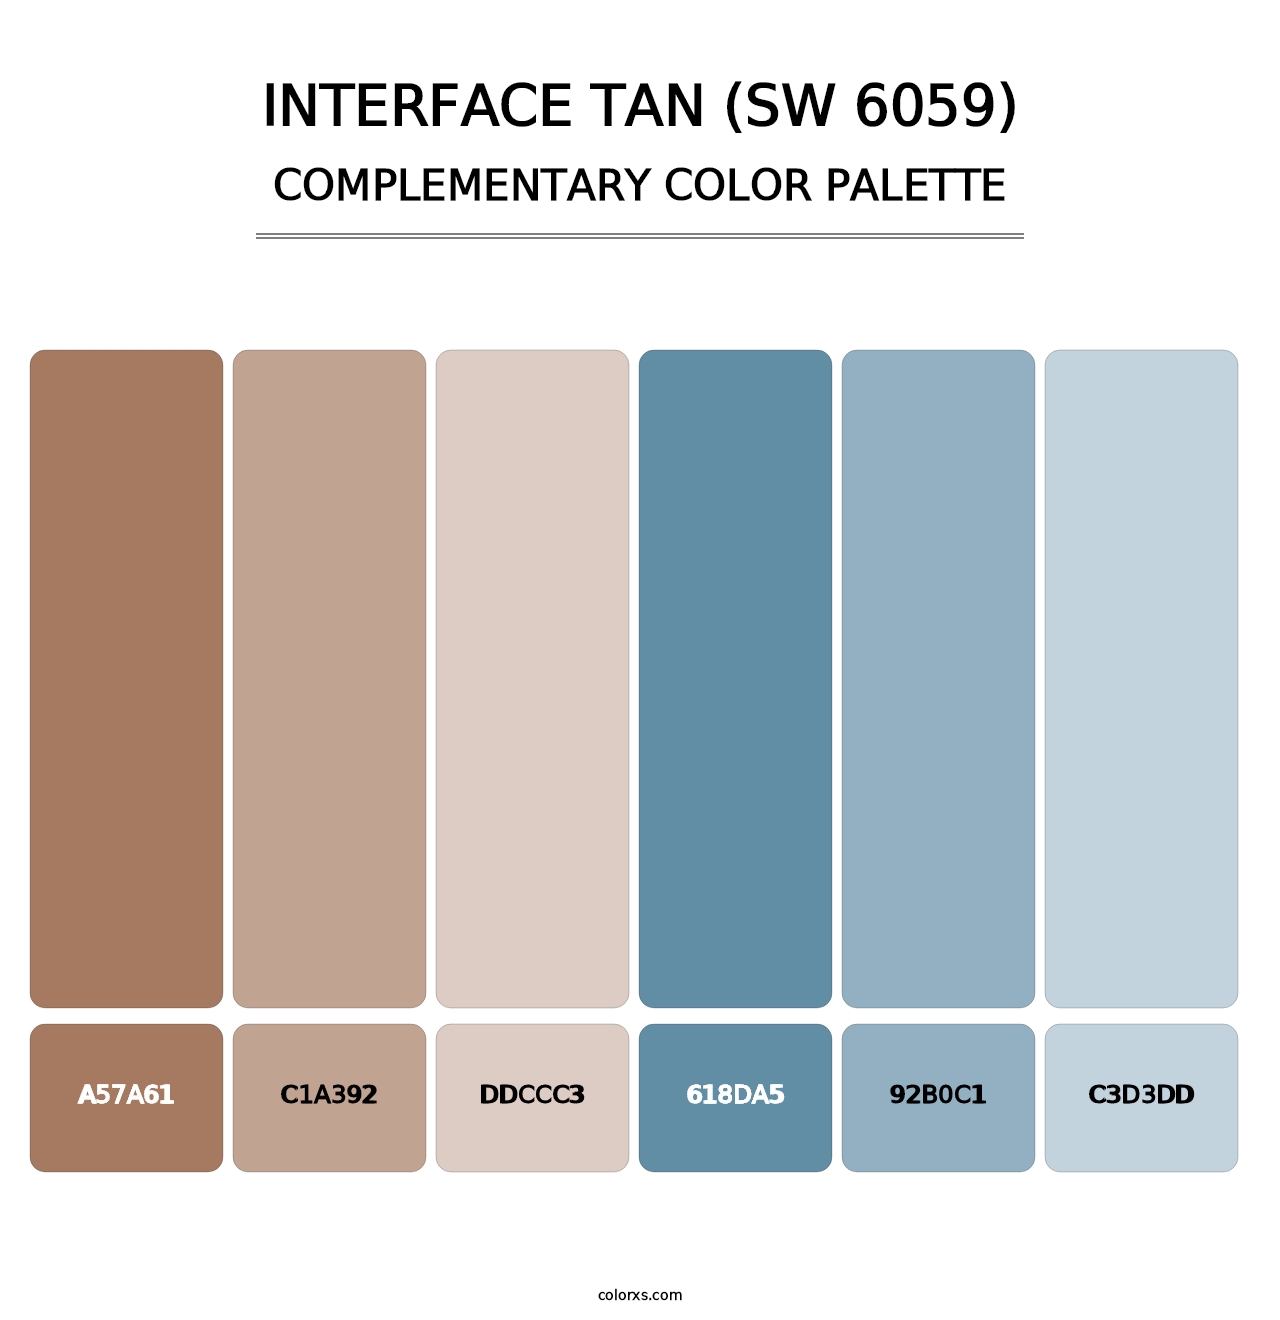 Interface Tan (SW 6059) - Complementary Color Palette